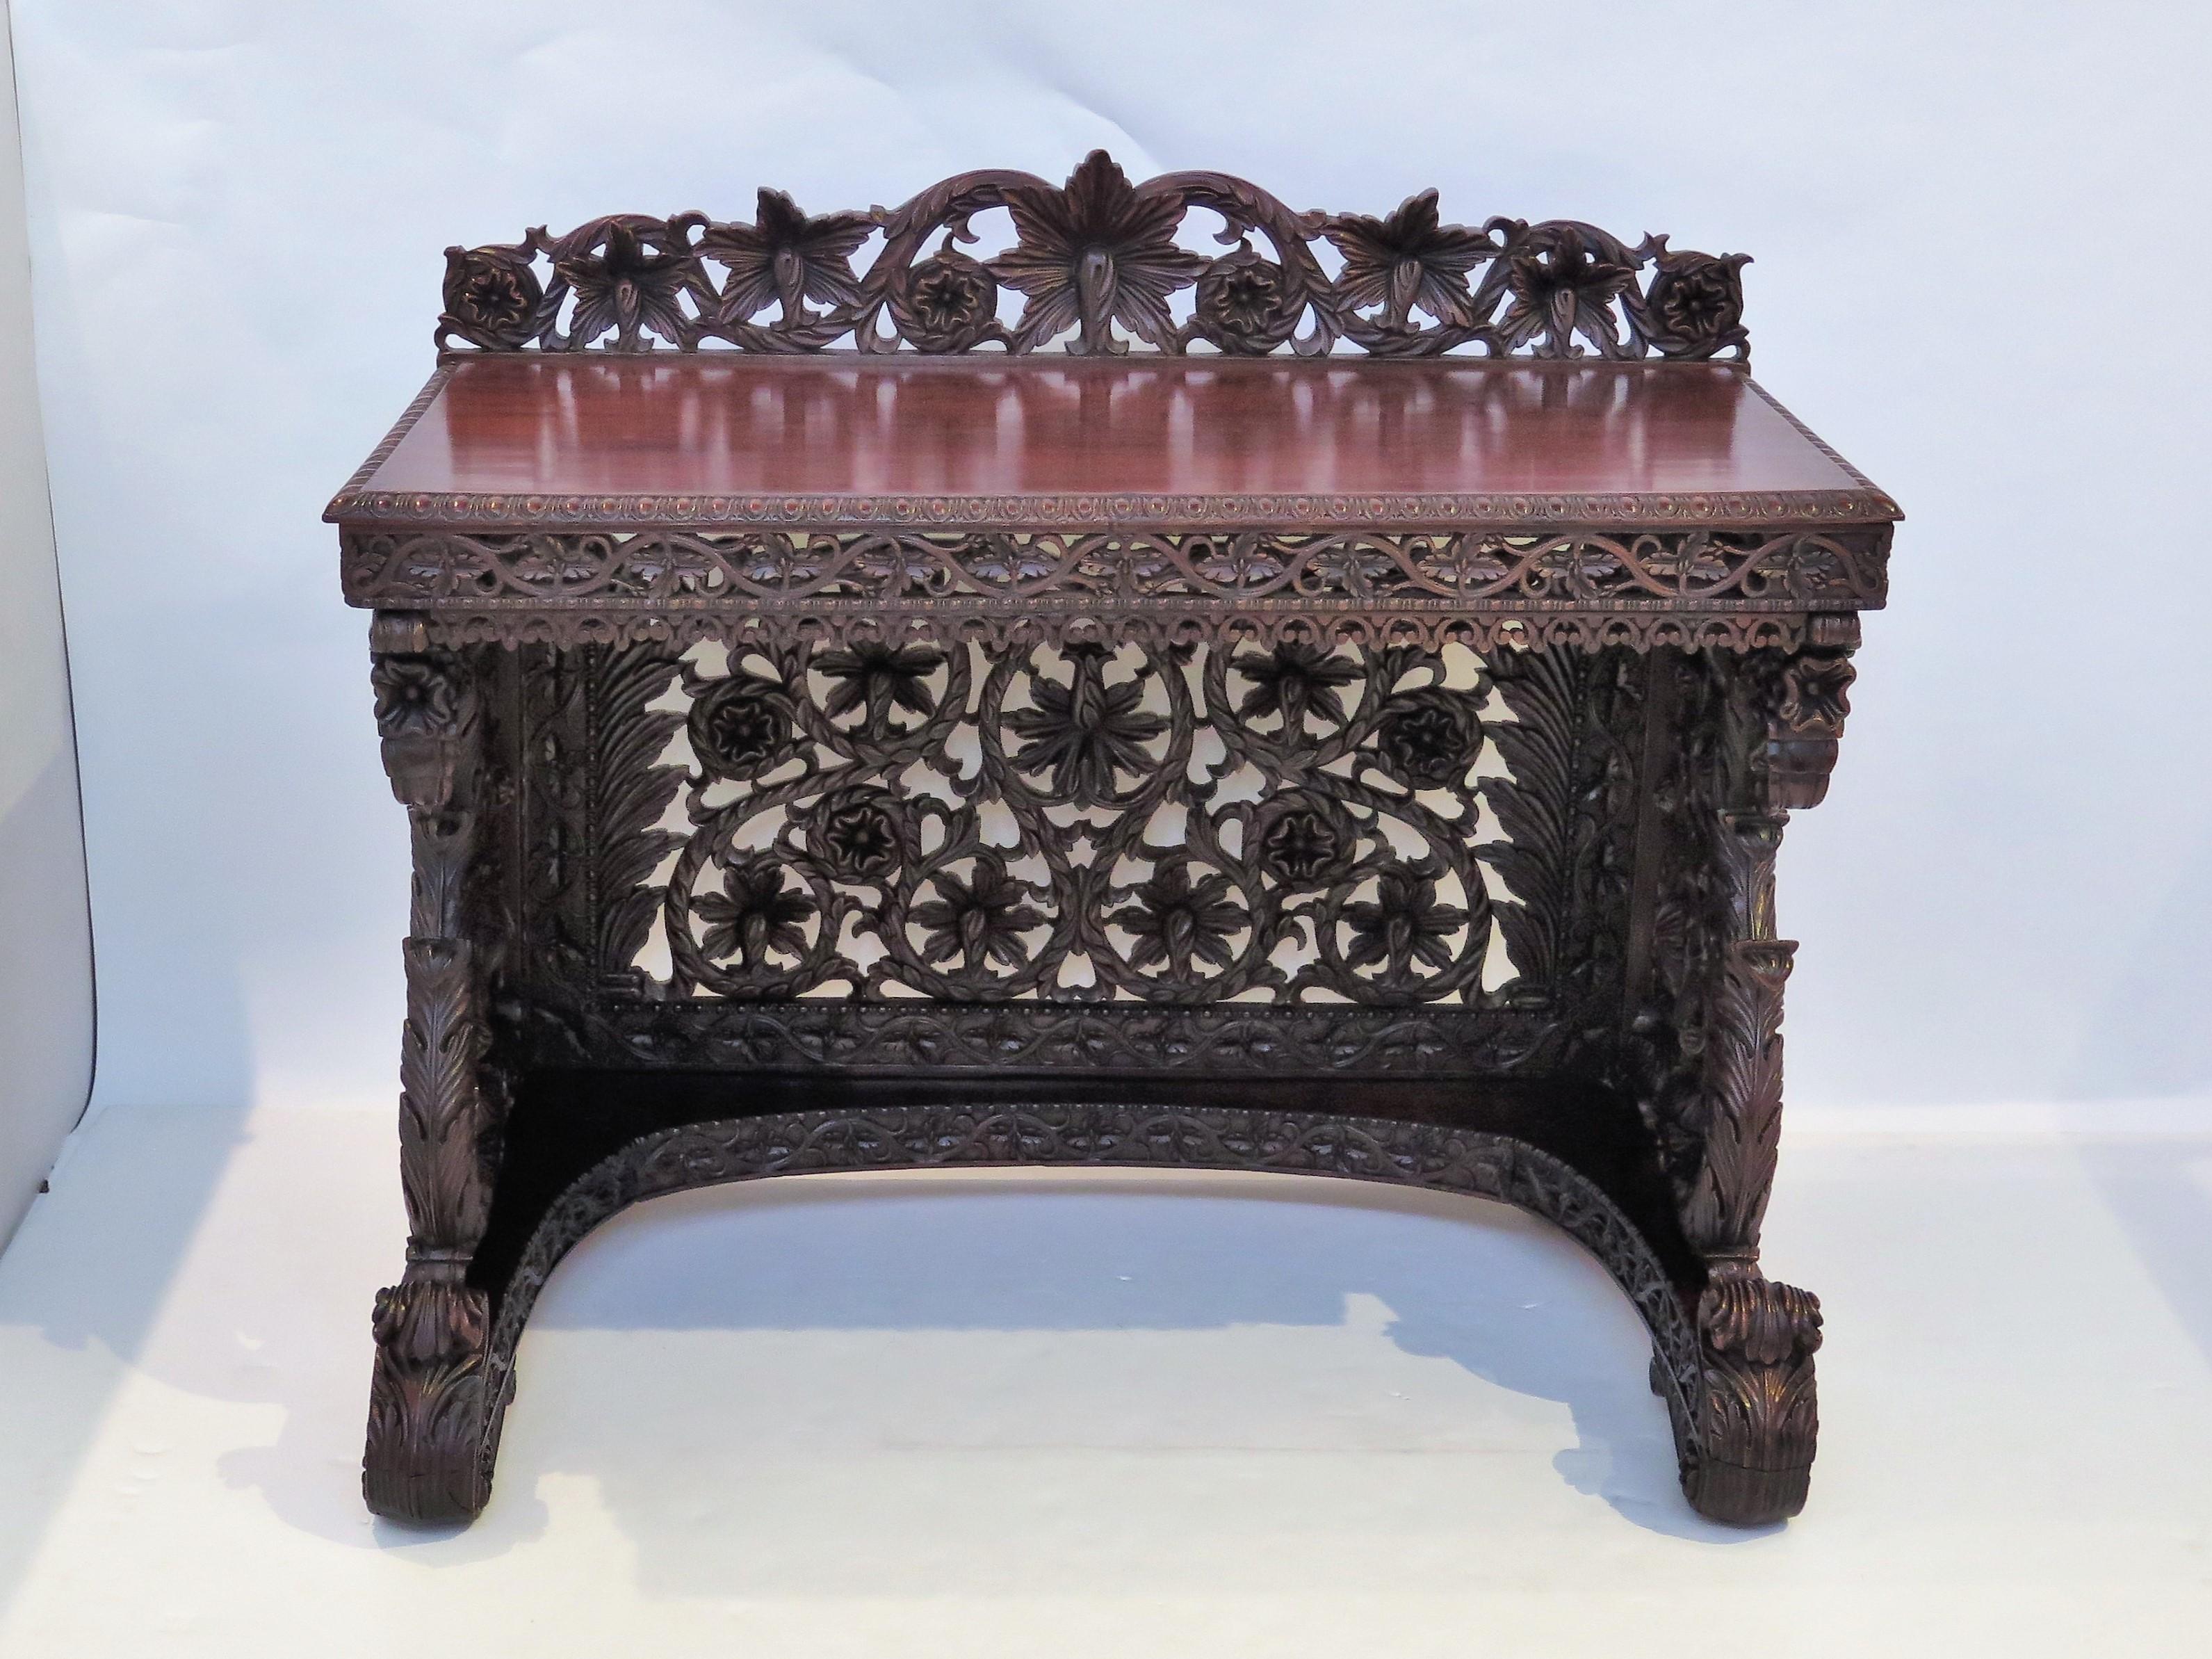 An intricately carved and pierced Anglo-Indian sideboard in rosewood with ornate openwork in an over-all floral design and scrolling acanthus leaves. Solid top and carved back, apron and sides. A carved shelf at the bottom.